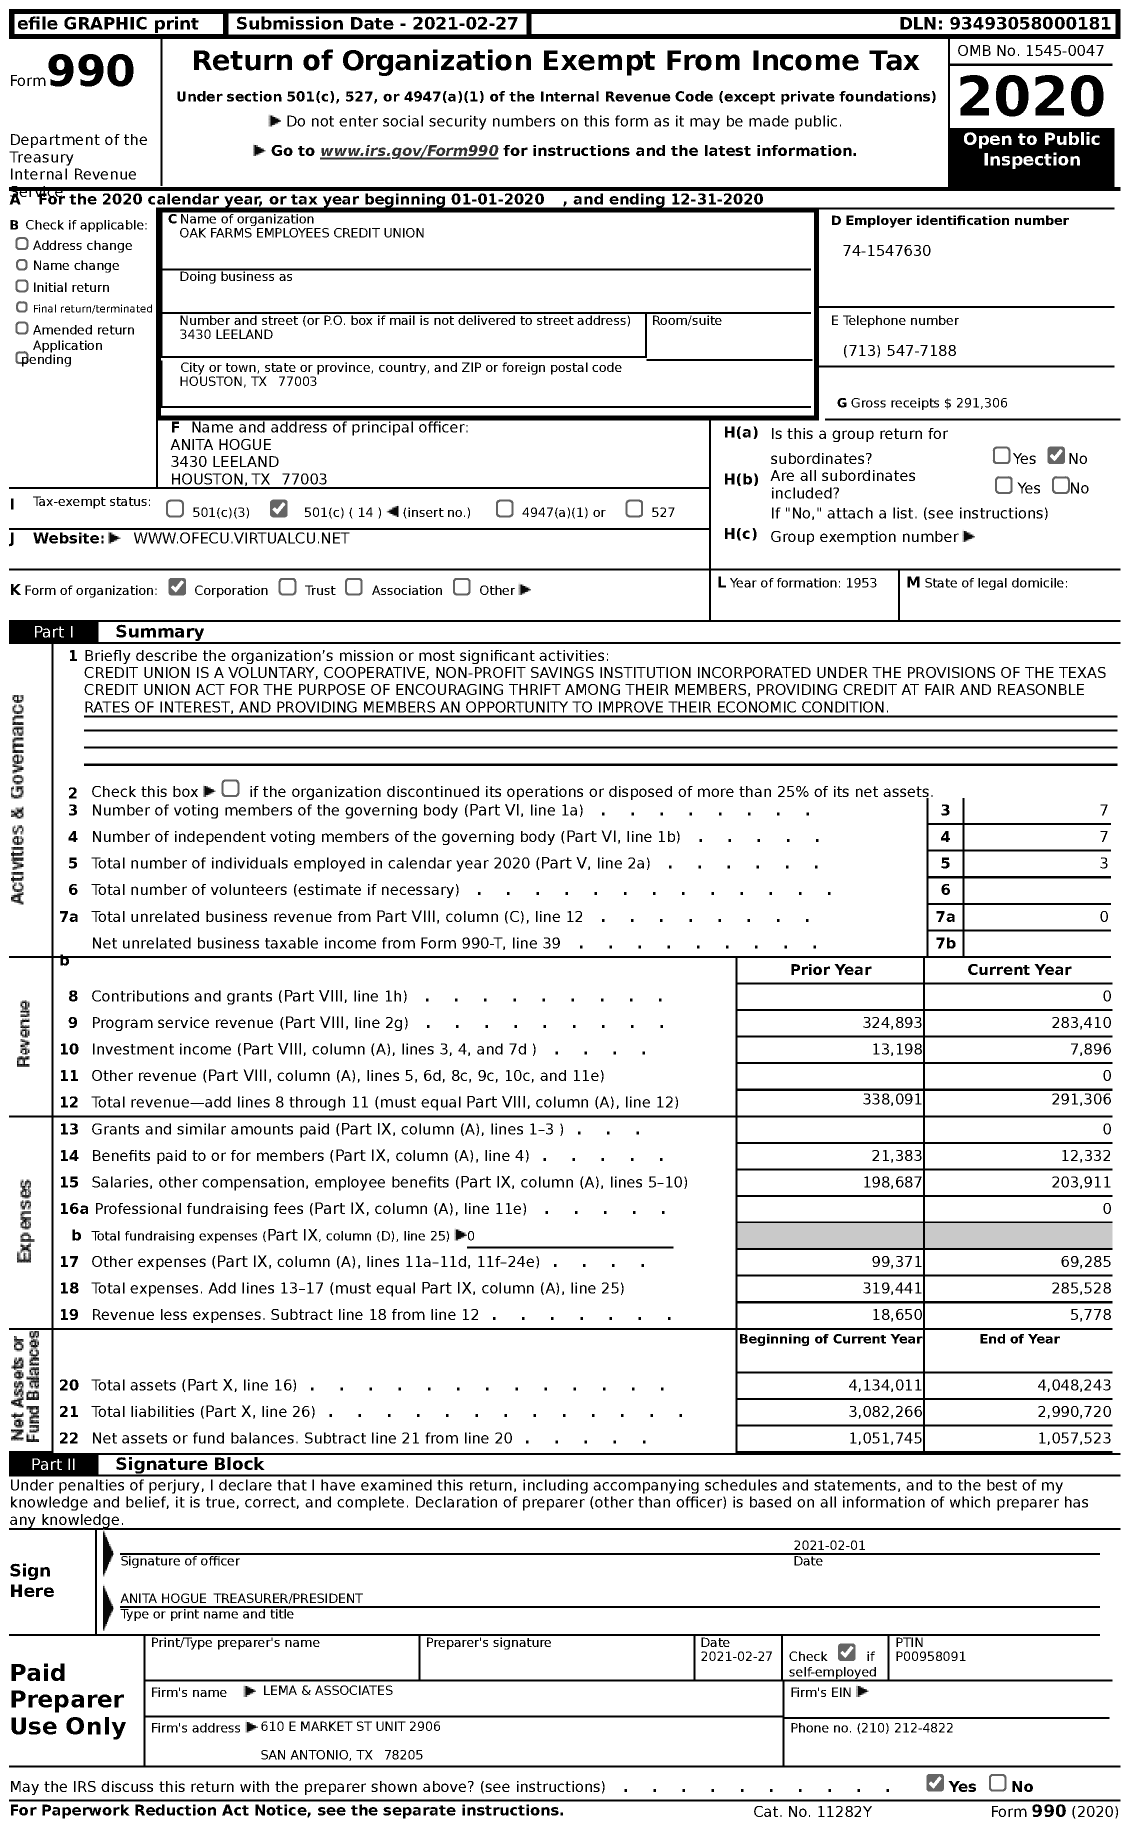 Image of first page of 2020 Form 990 for Oak Farms Employees Credit Union